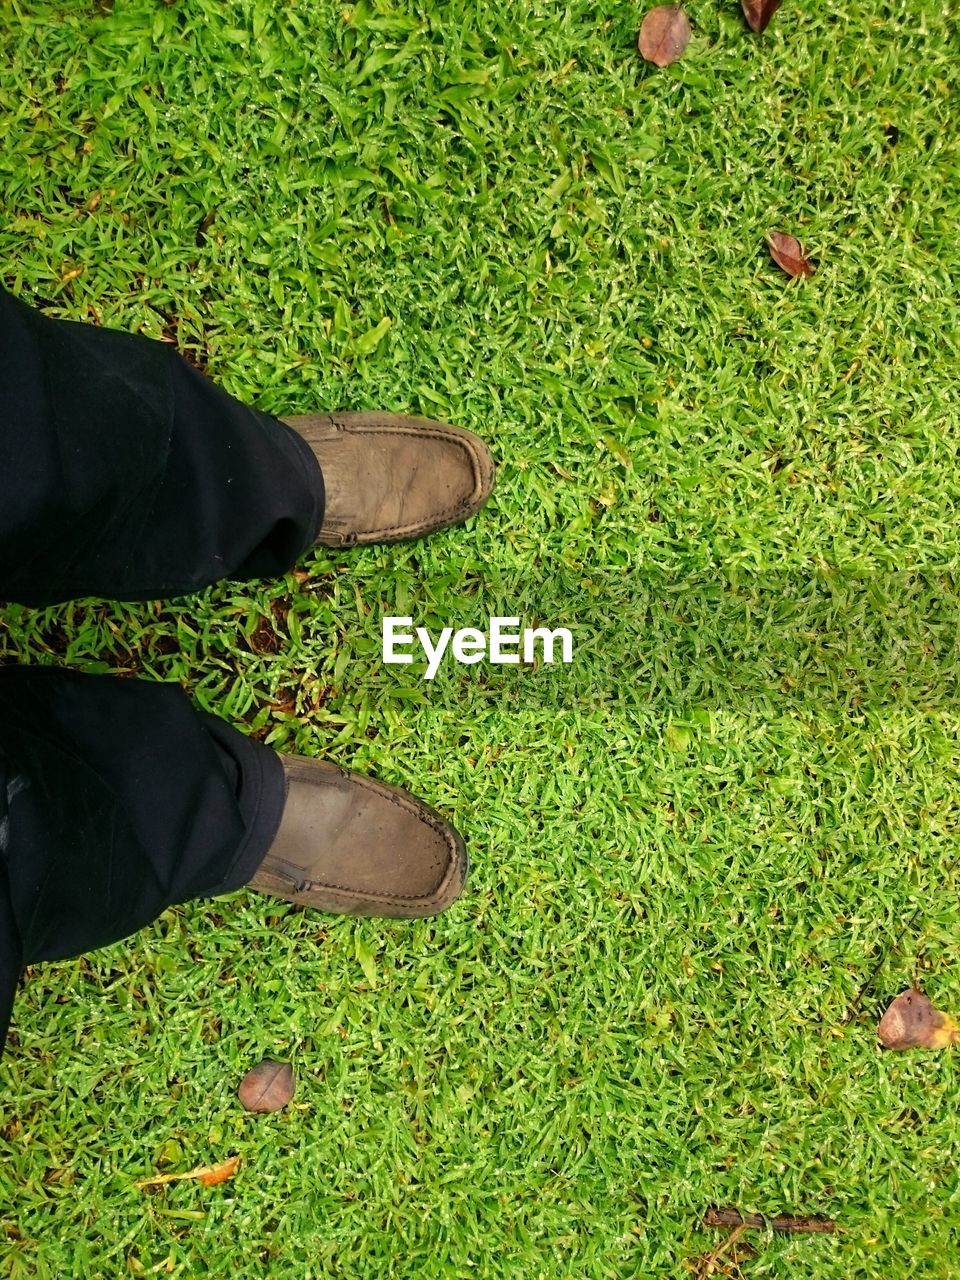 LOW SECTION OF PERSON STANDING ON GRASS